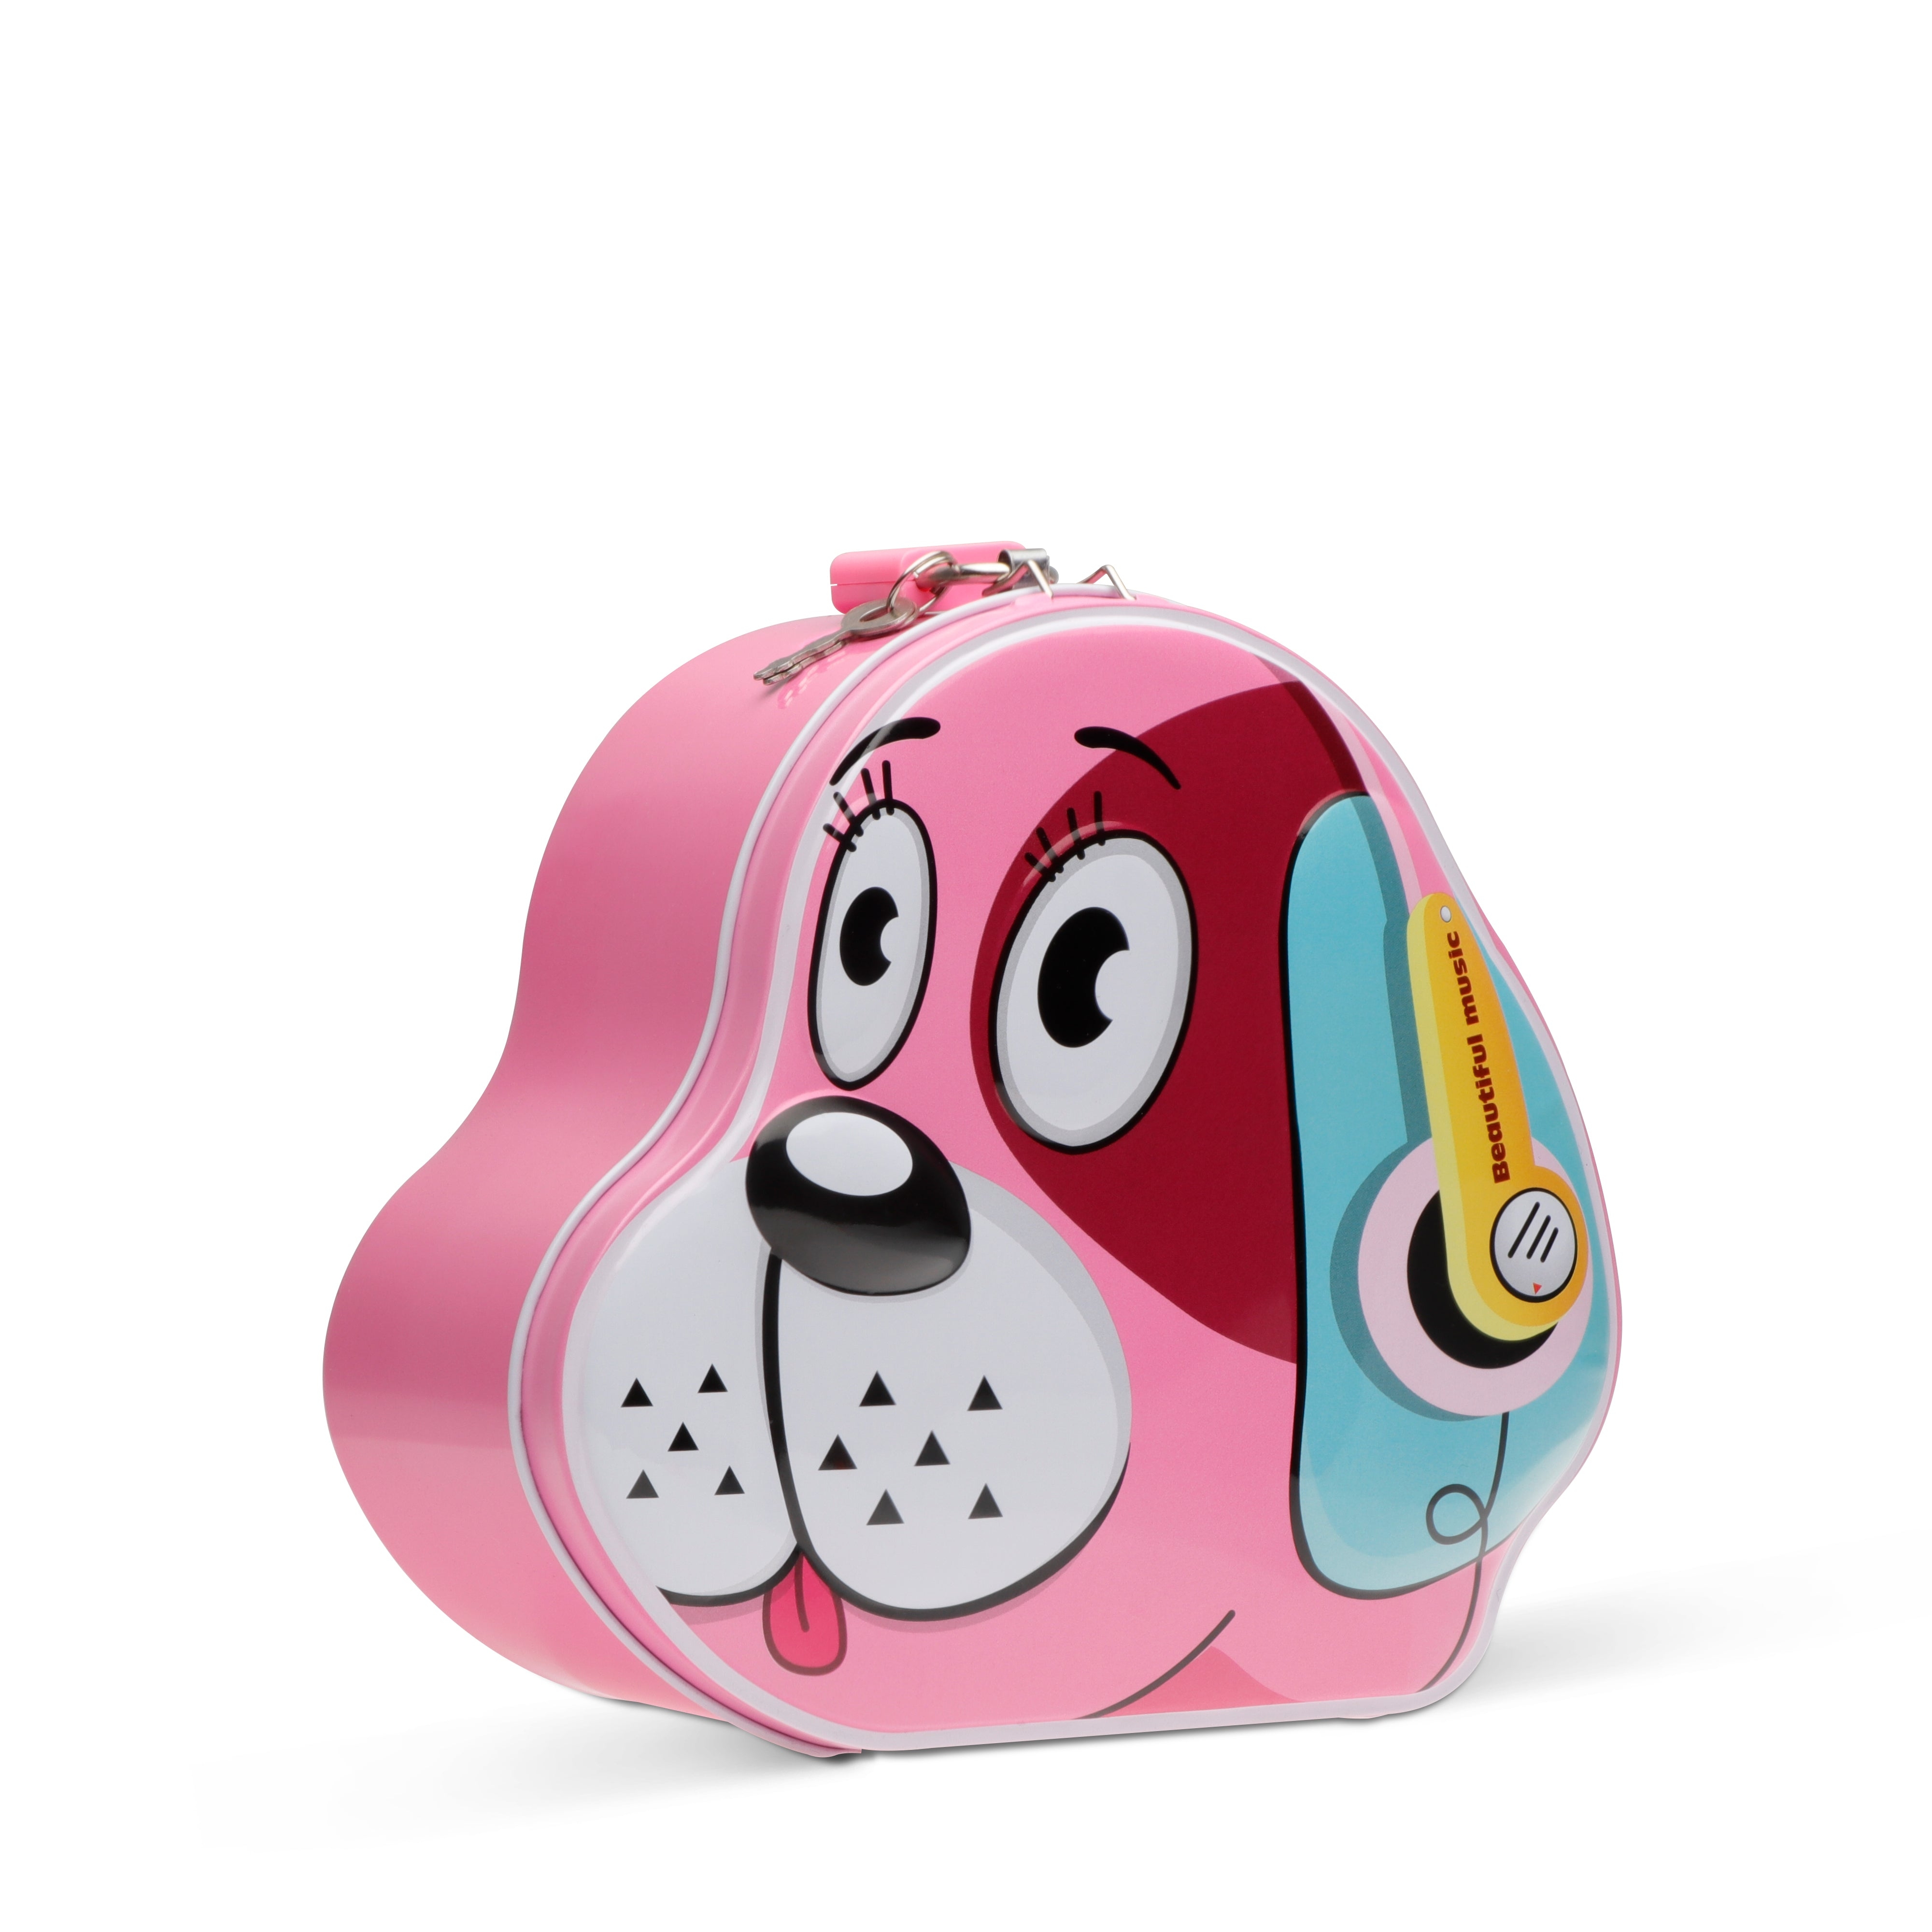 Archies Piggy Bank -Piggy Bank for Kids, Puppy Shaped Coin Box, Piggybank, Coin Bank, Money Bank, Piggy Bank for Kids Boys and Girls, Money Bank for Kids with Lock-Pink